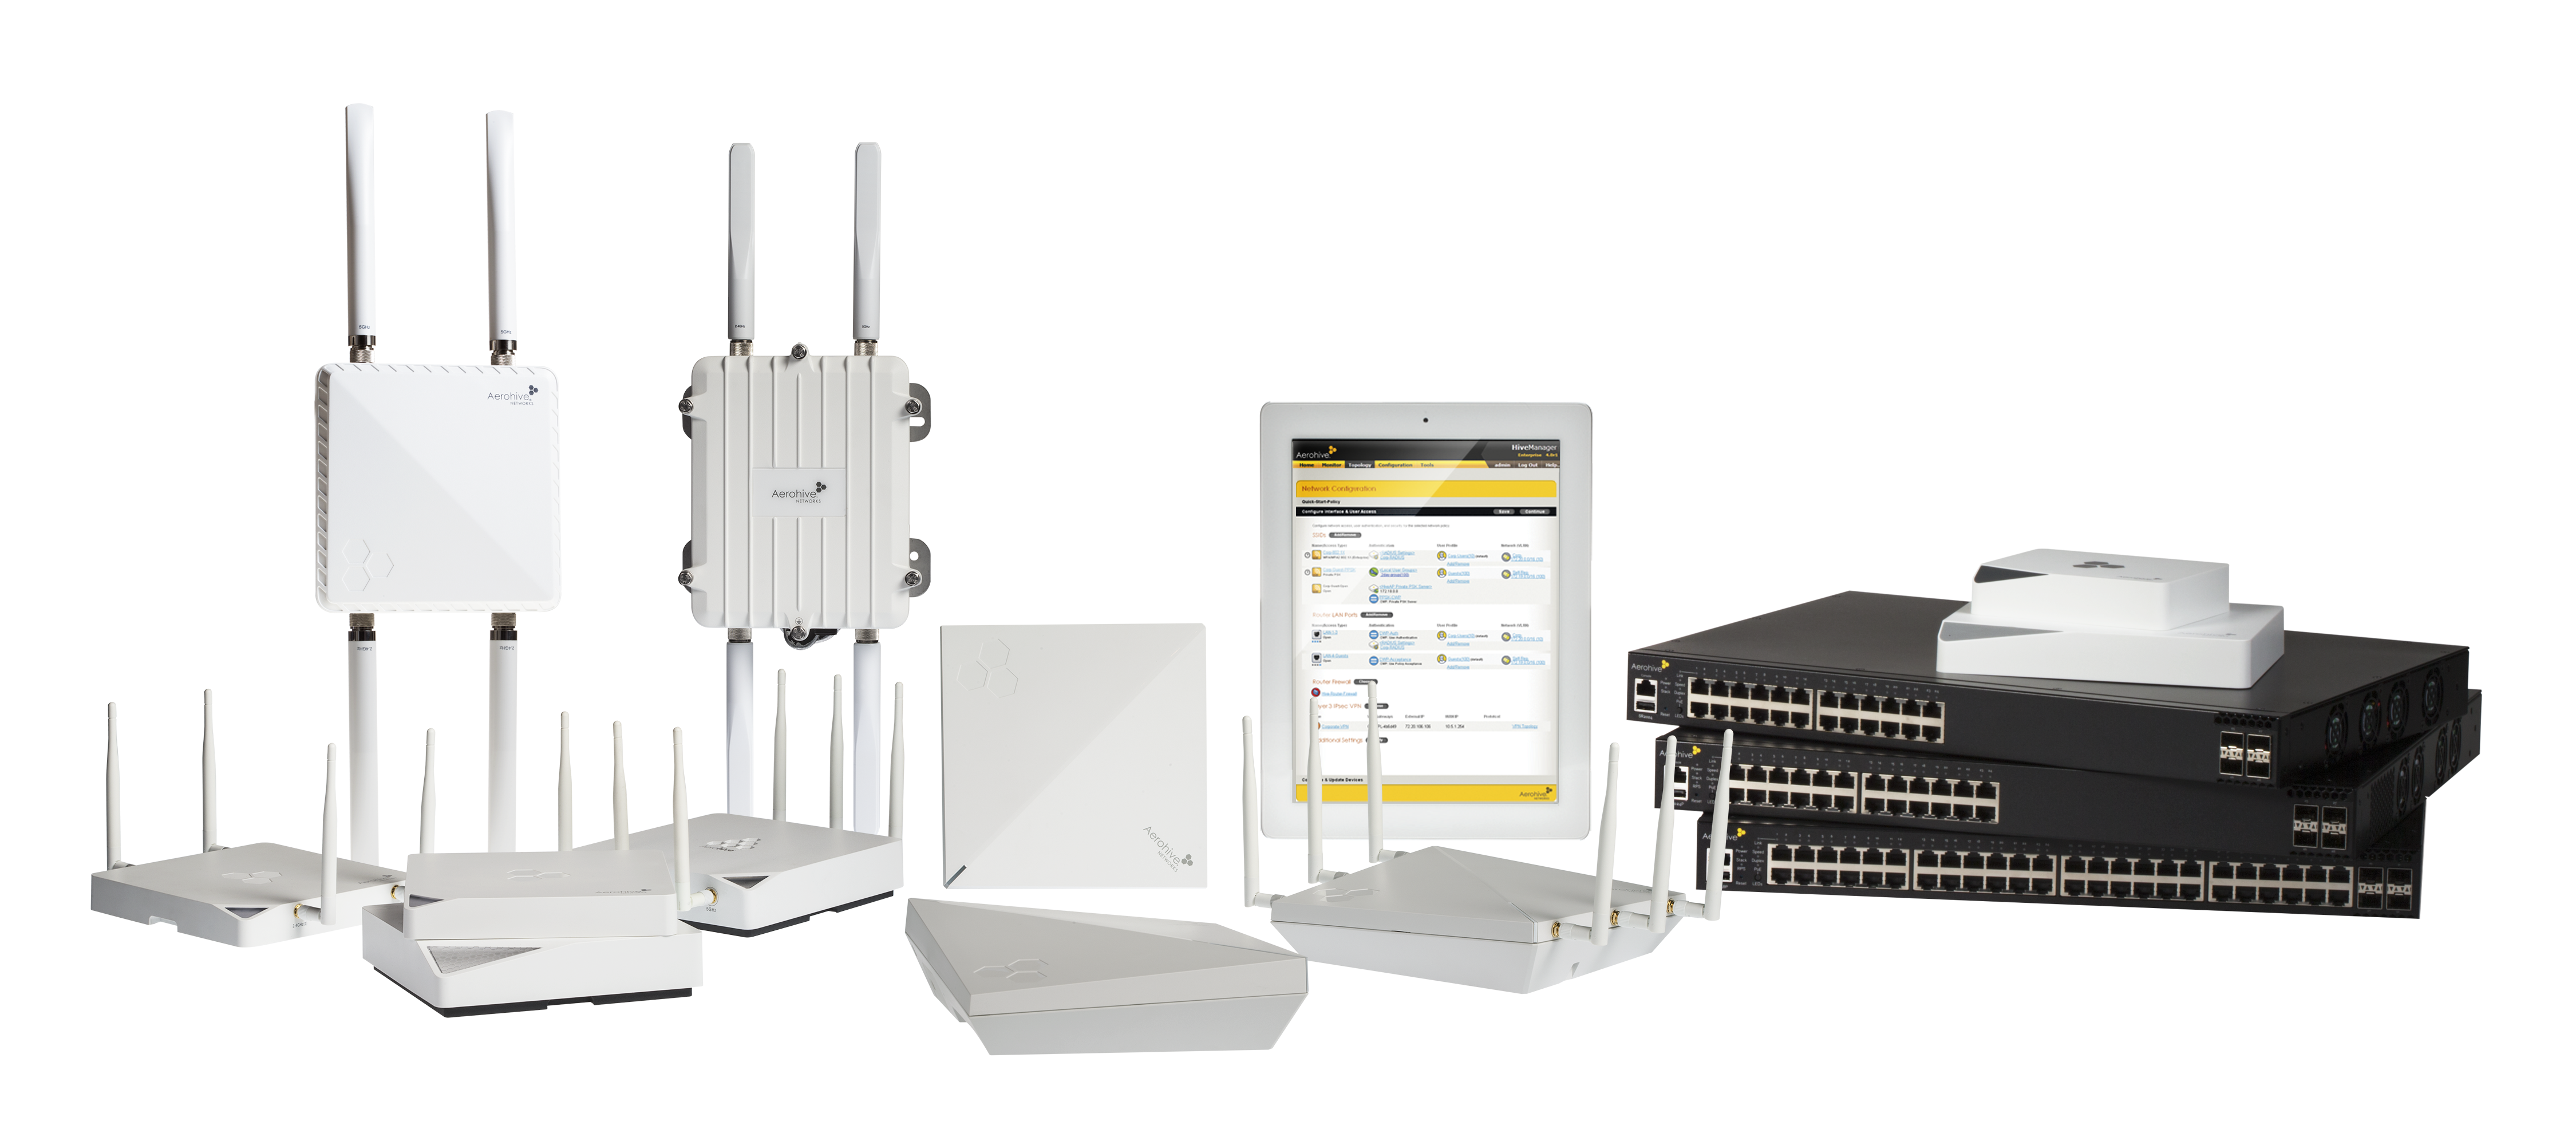 HP buys Aruba and next thing you know Dell is reselling Aerohive WiFi gear | Network World